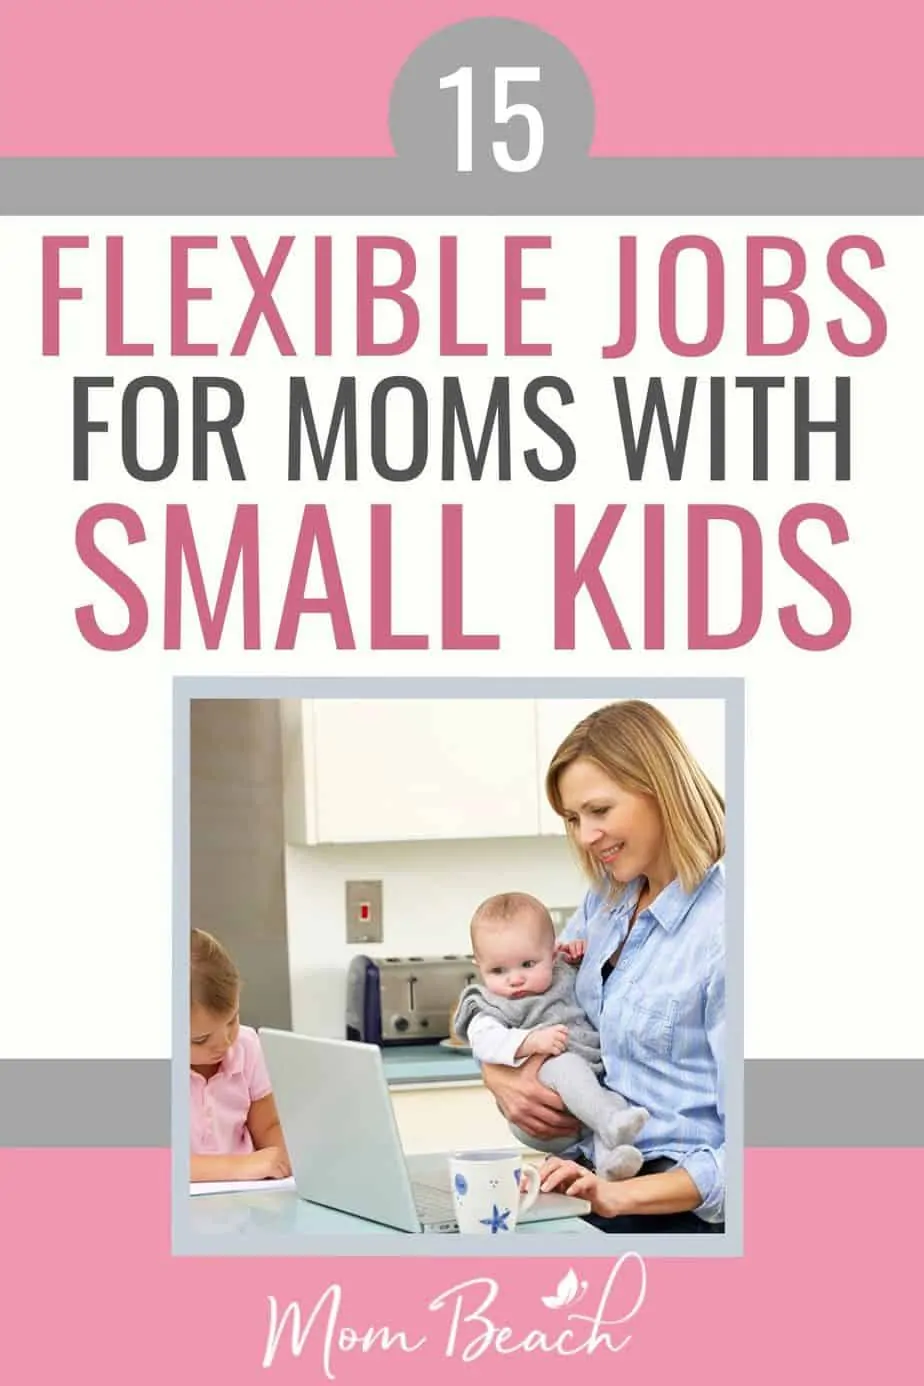 You won't believe how easy these 15 flexible jobs are! If you are a mom with a small kid, then you will love these flexible jobs for moms. They require no experience or degree at all. Work from home in your spare time with these 15 flexible jobs right now! They are perfect for stay at home moms who want to earn extra money from home. #flexiblejobsformoms #stayathomemomjobs #momjobs #workfromhome #makemoneyfromhome #onlinejobs #onlinejobsformoms #jobsformomswithsmallkids